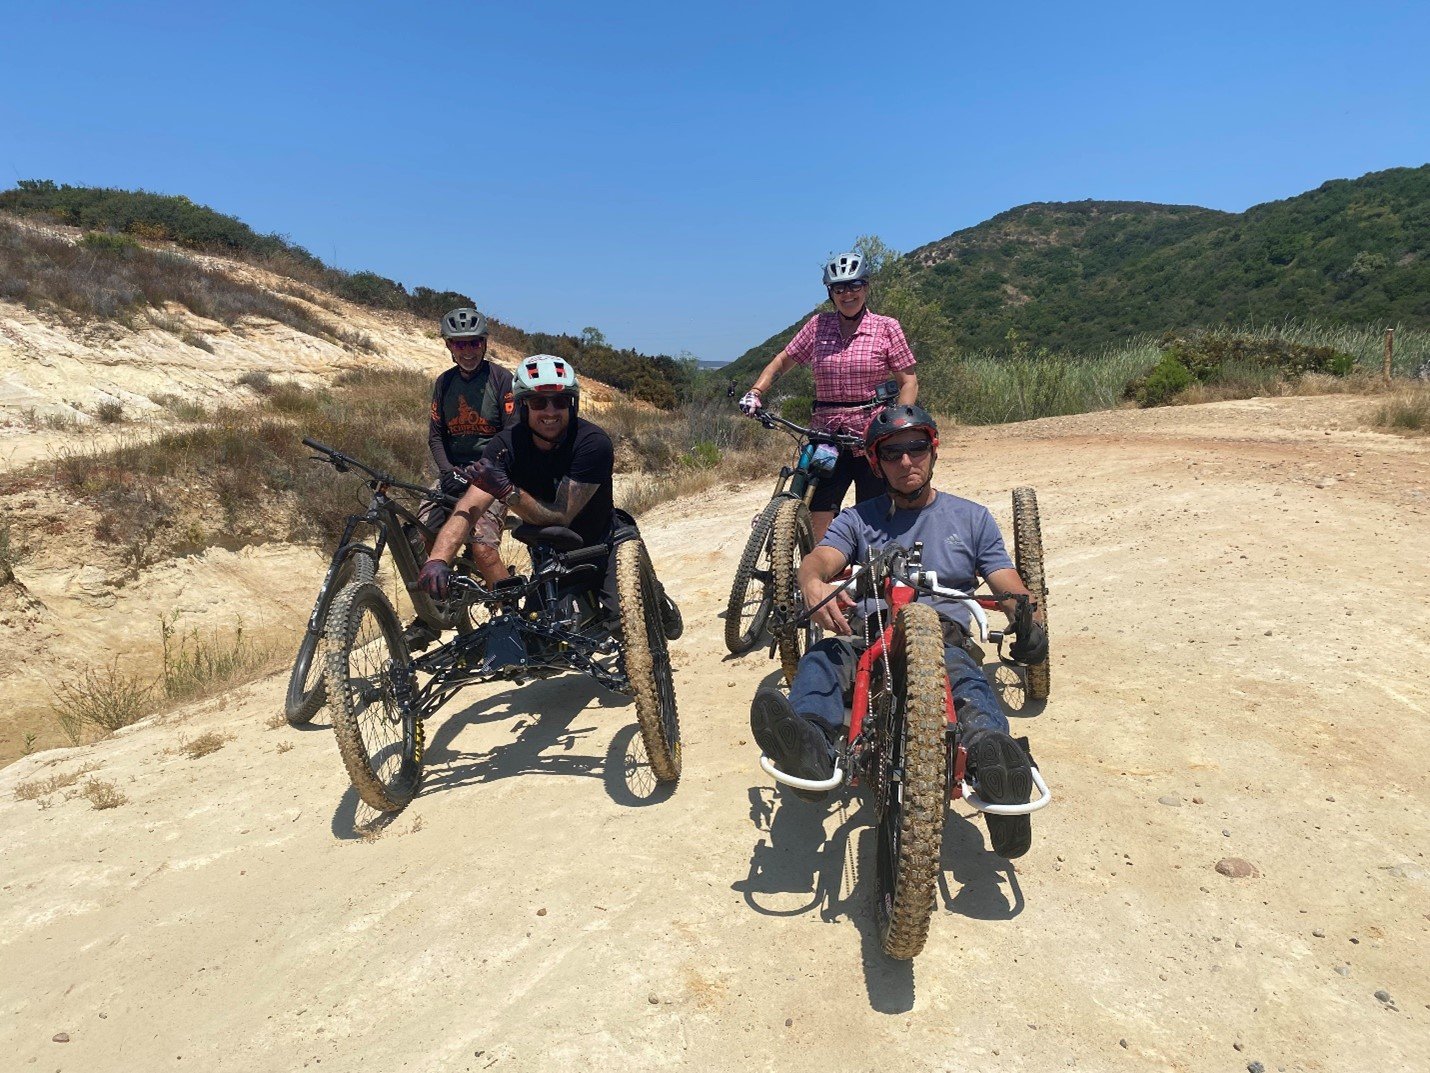 Meeting adaptive cyclists on the trail in PQ